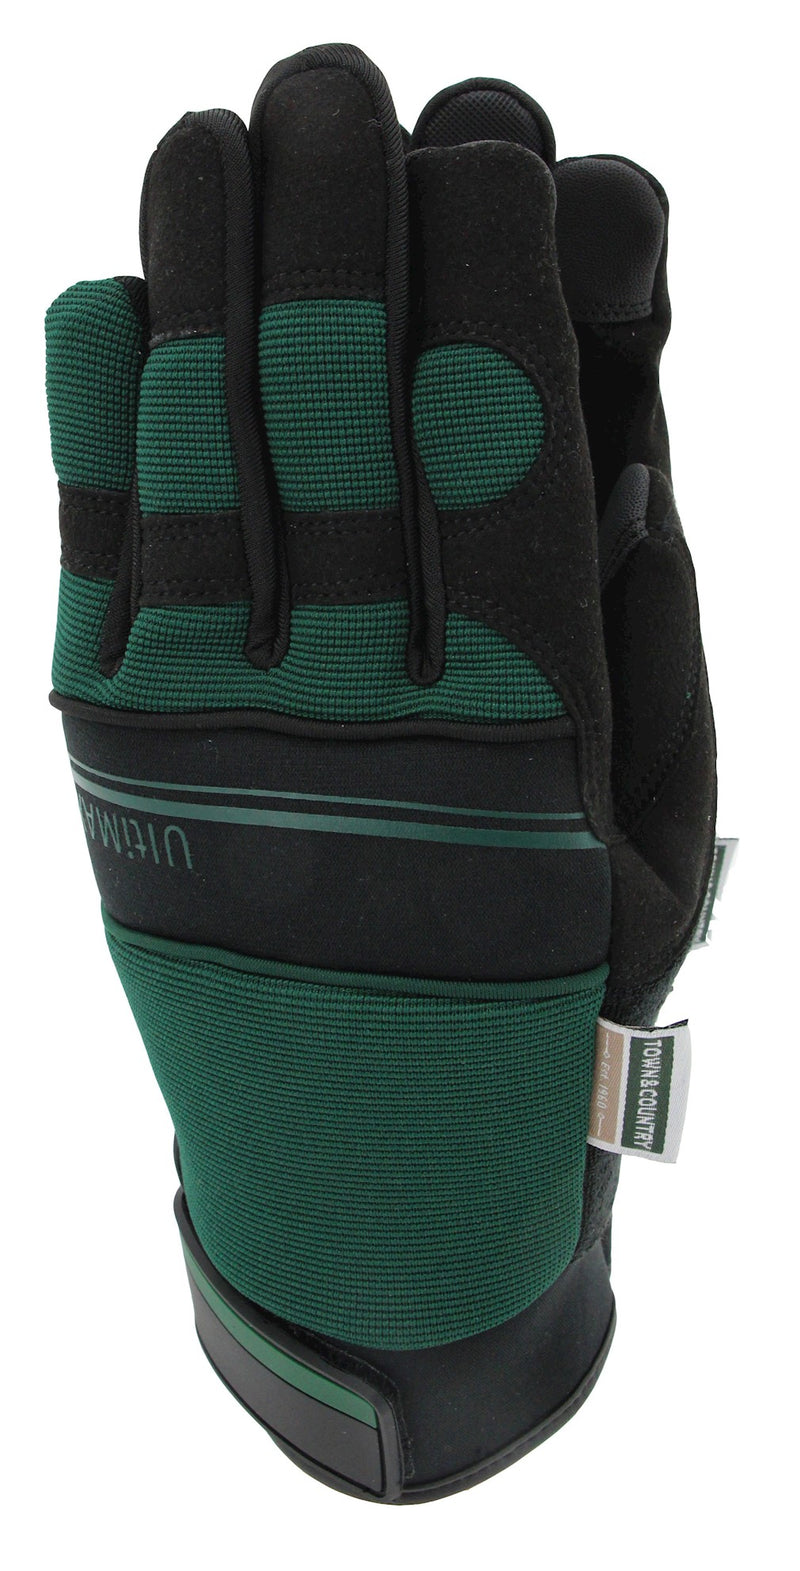 Town & Country Ultimax Glove